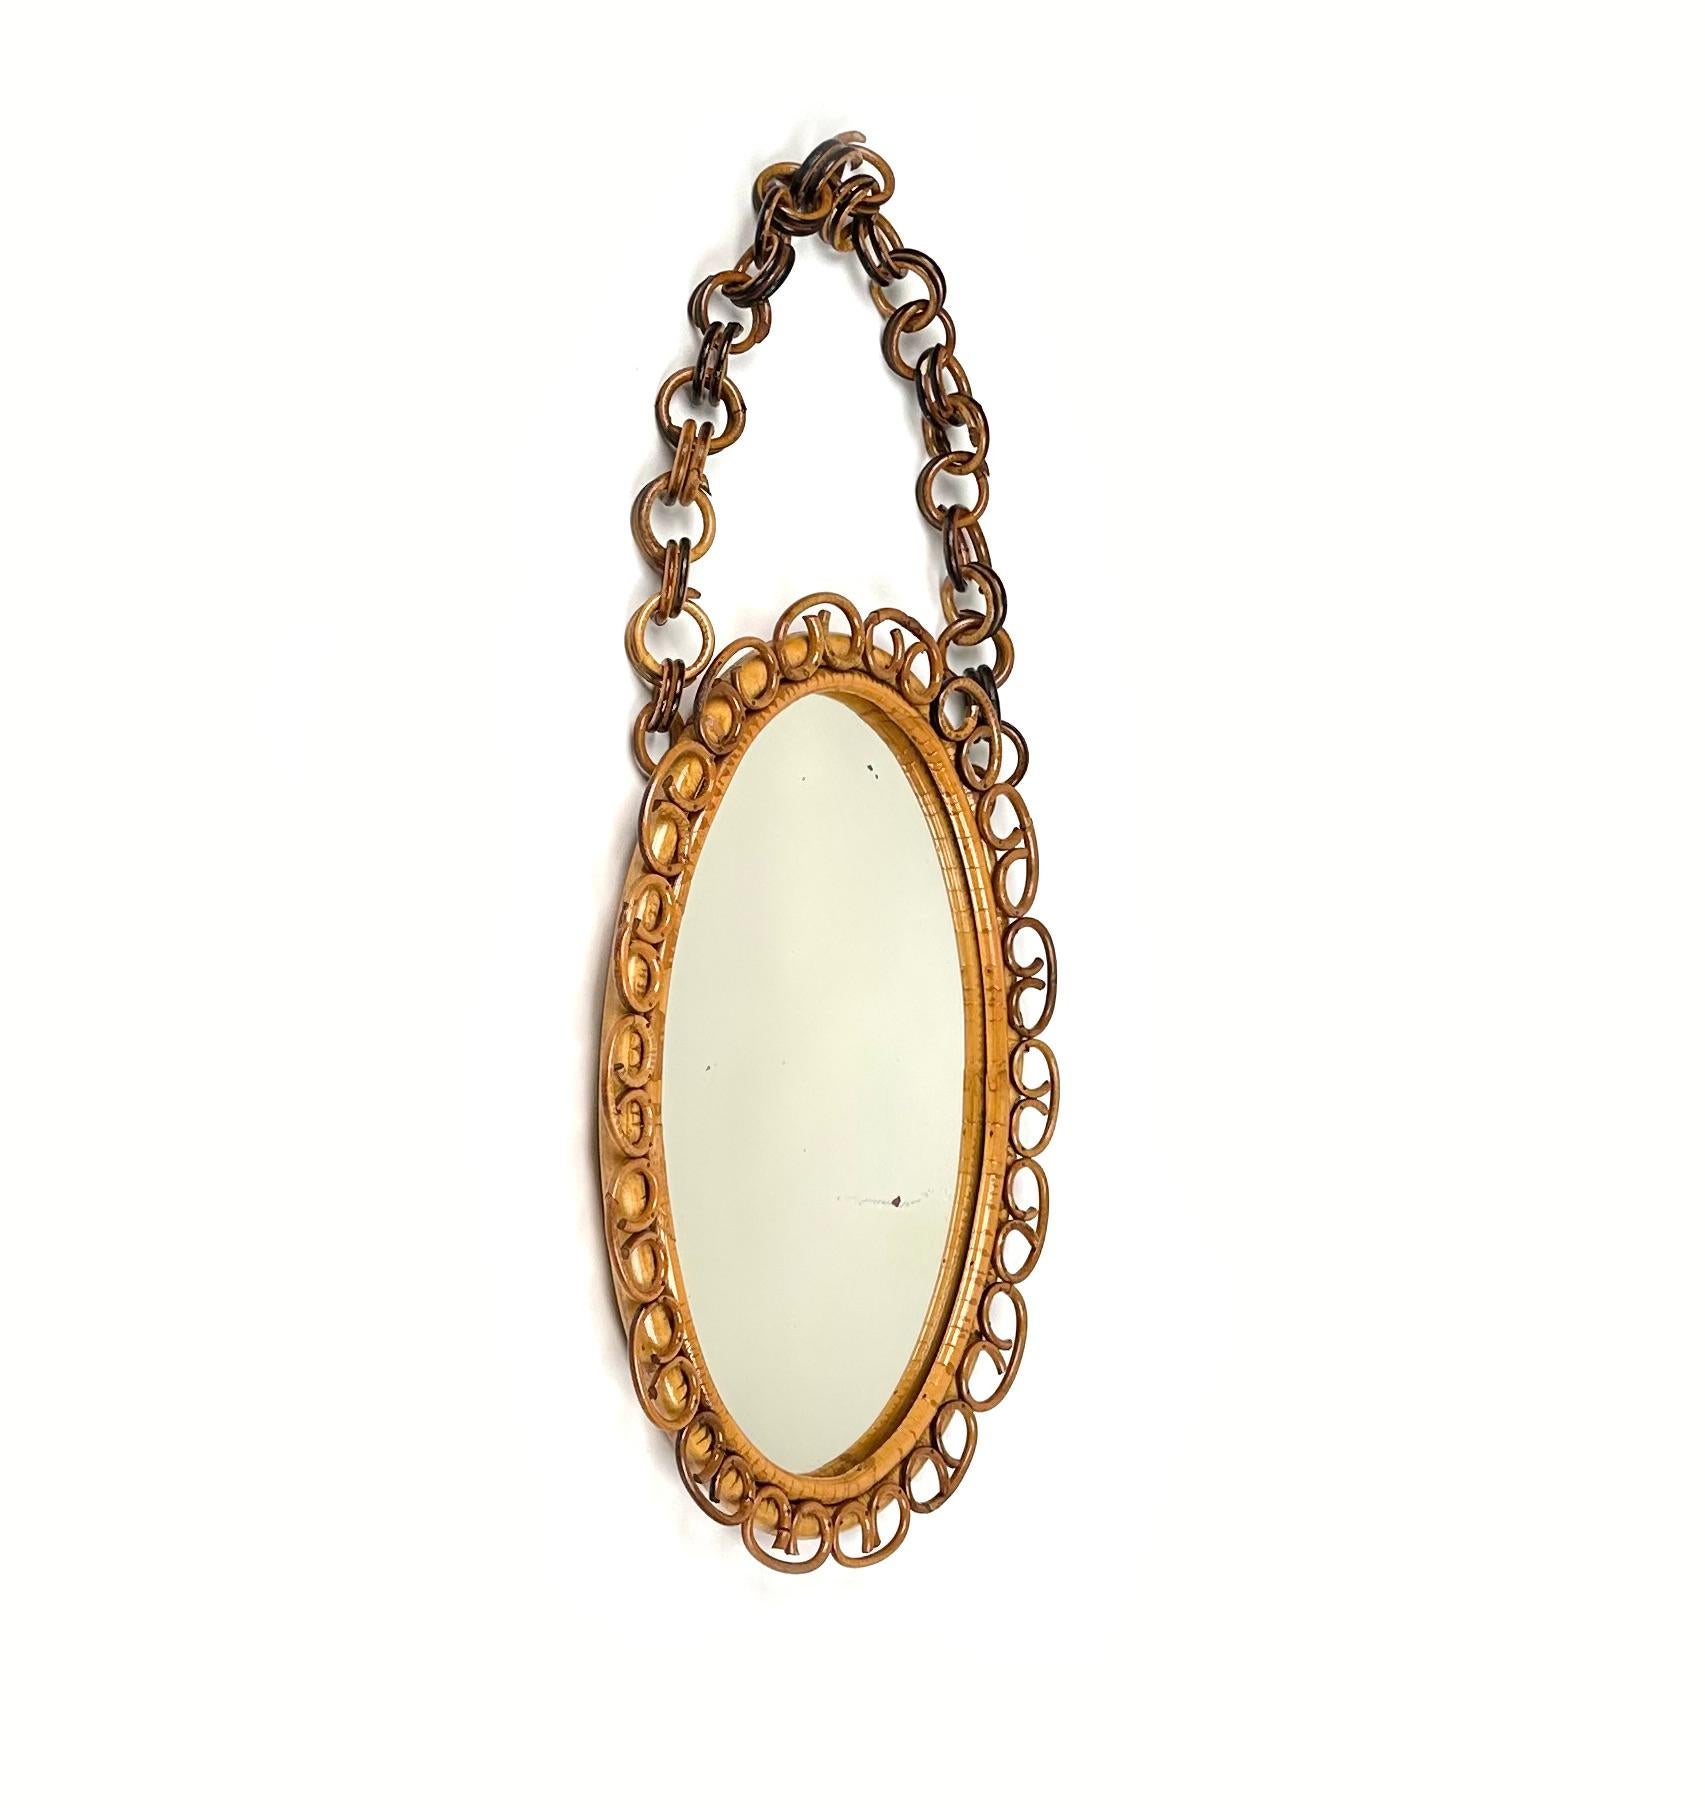 Midcentury Beautiful oval wall mirror in bamboo and rattan with chain.

Made in Italy in the 1960s.

Bamboo / rattan has been polished by a professional restorer.

the mirror, original of the period, shows signs of discolouration.

A highly